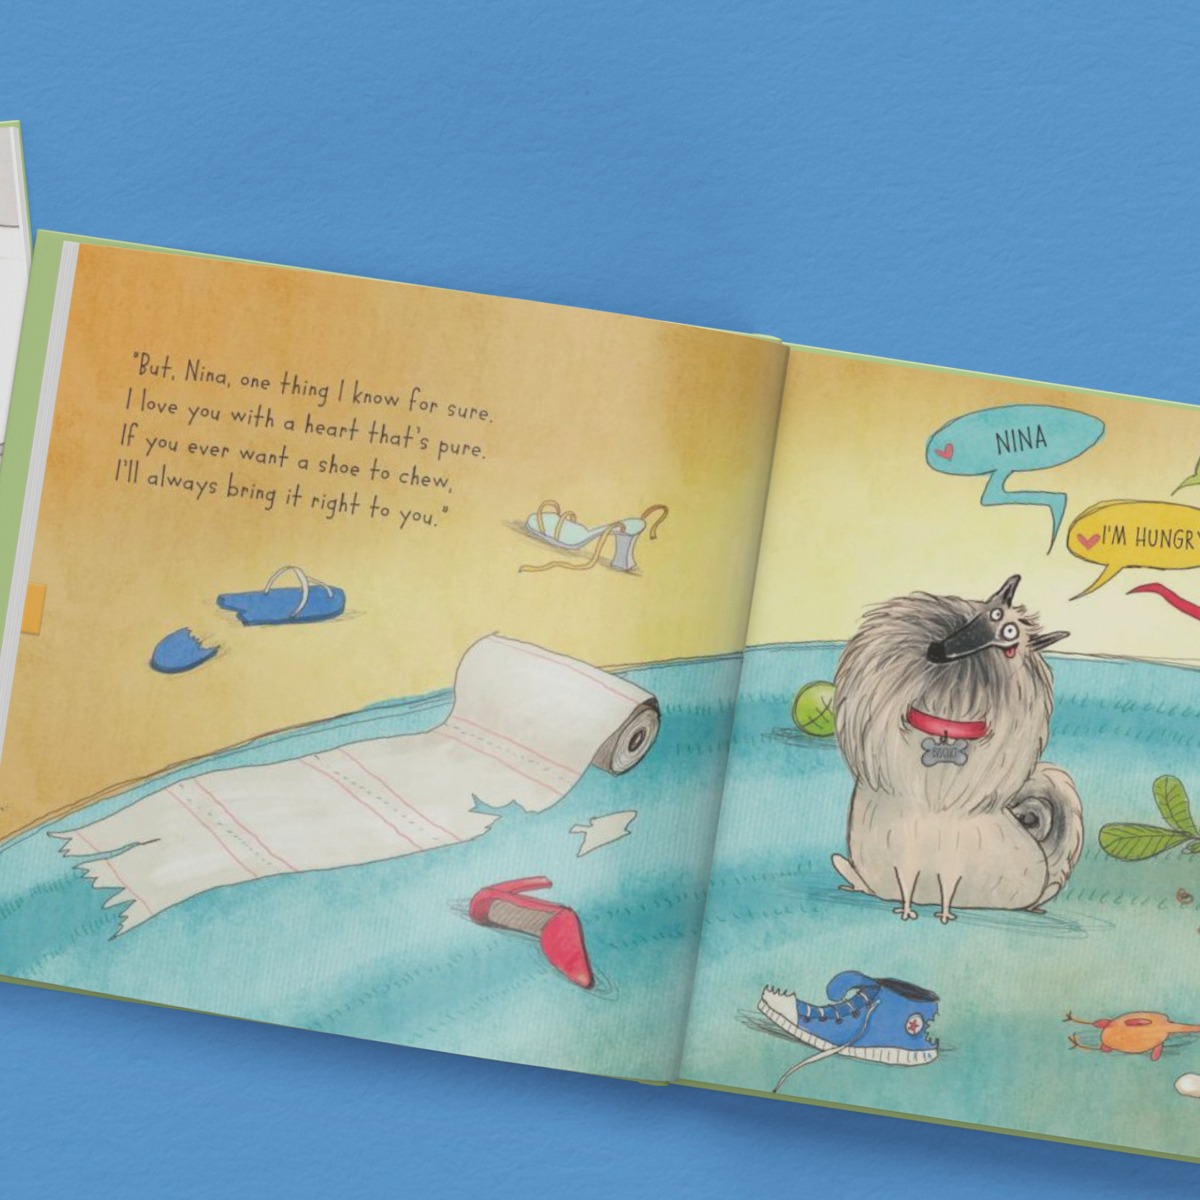 If My Dog Could Talk Personalised Book